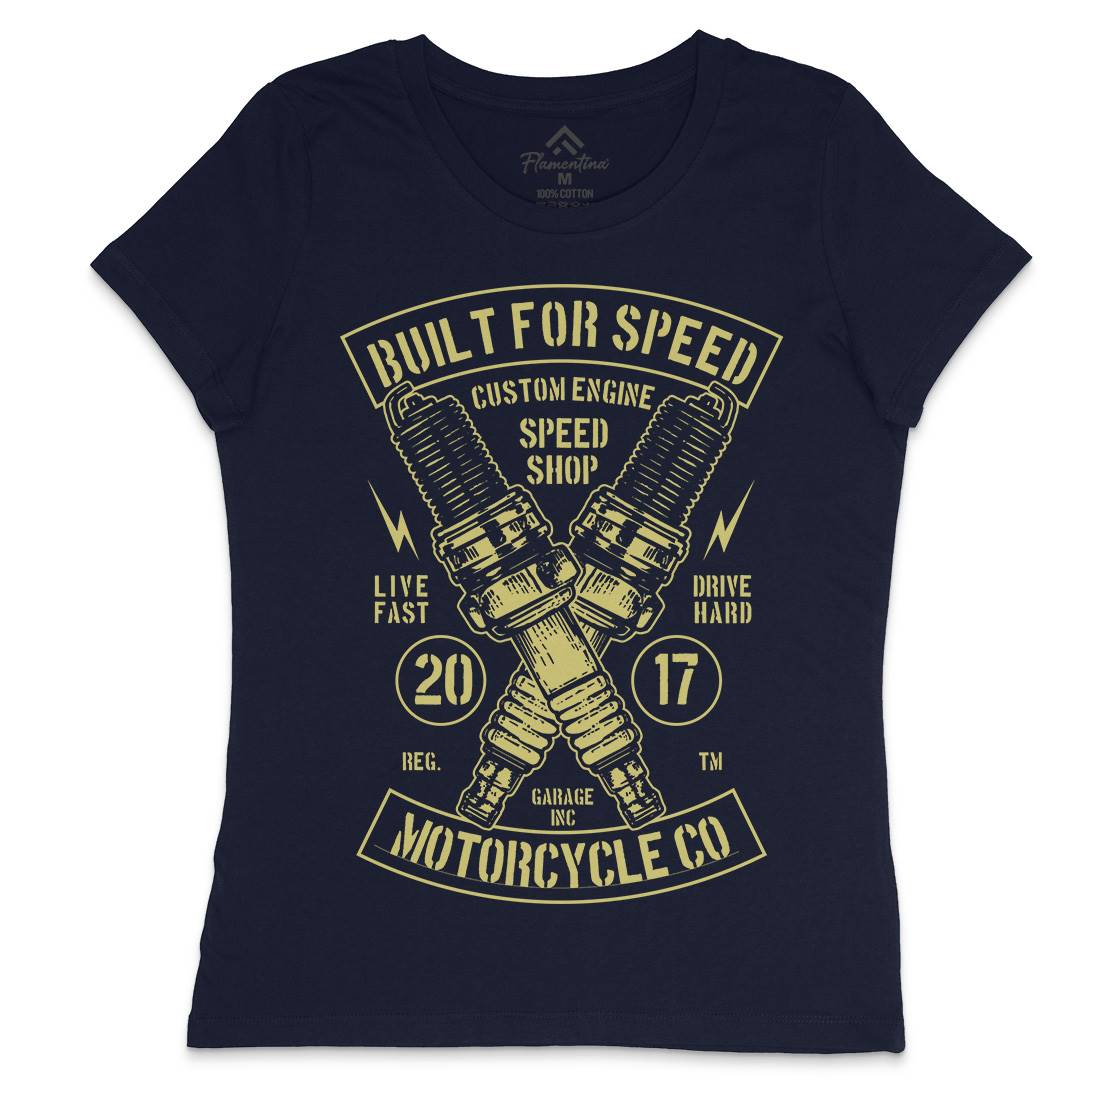 Built For Speed Womens Crew Neck T-Shirt Motorcycles B188